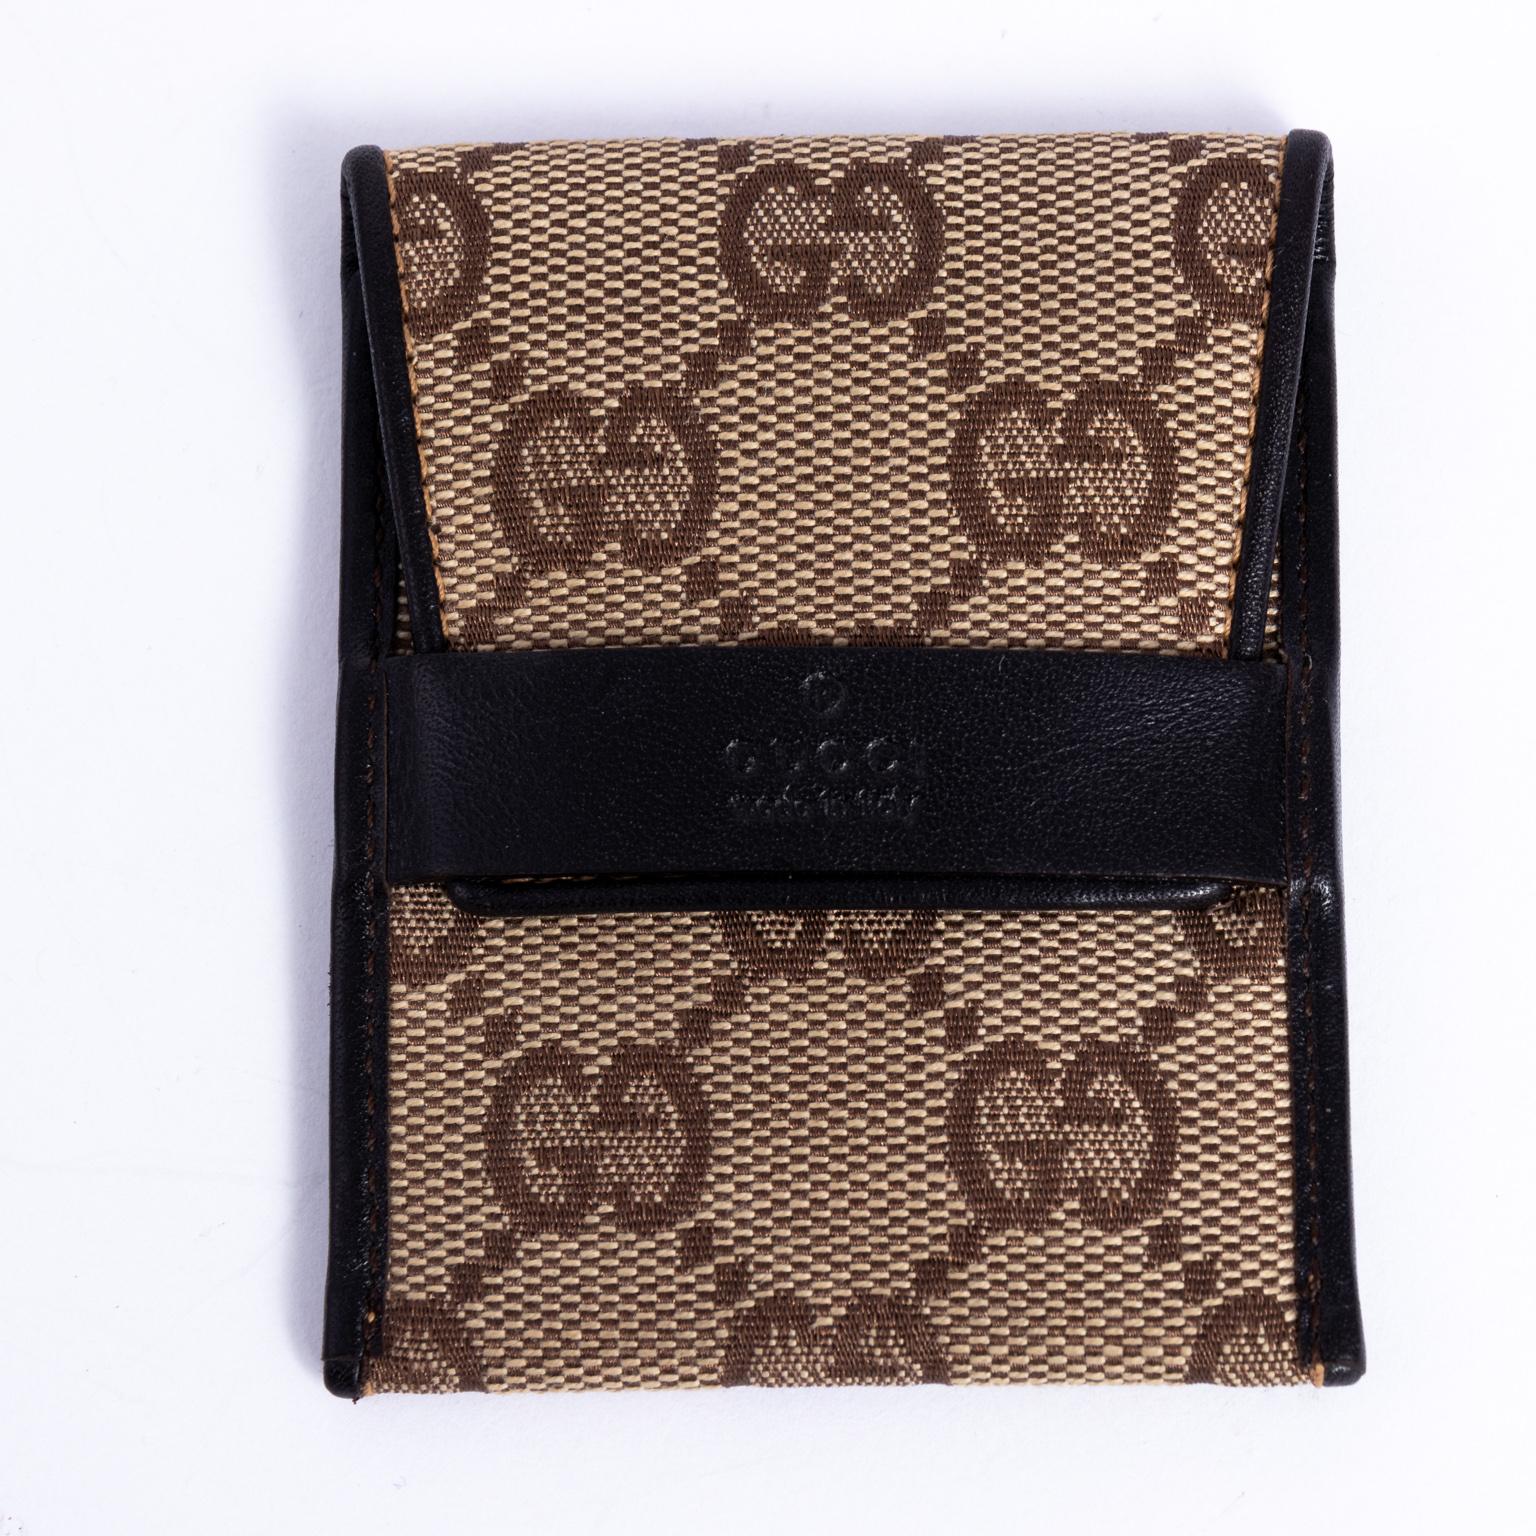 Gucci condom holder in canvas and leather from Tom Ford's collaboration with Gucci, circa 2001-2002. Made in Italy.